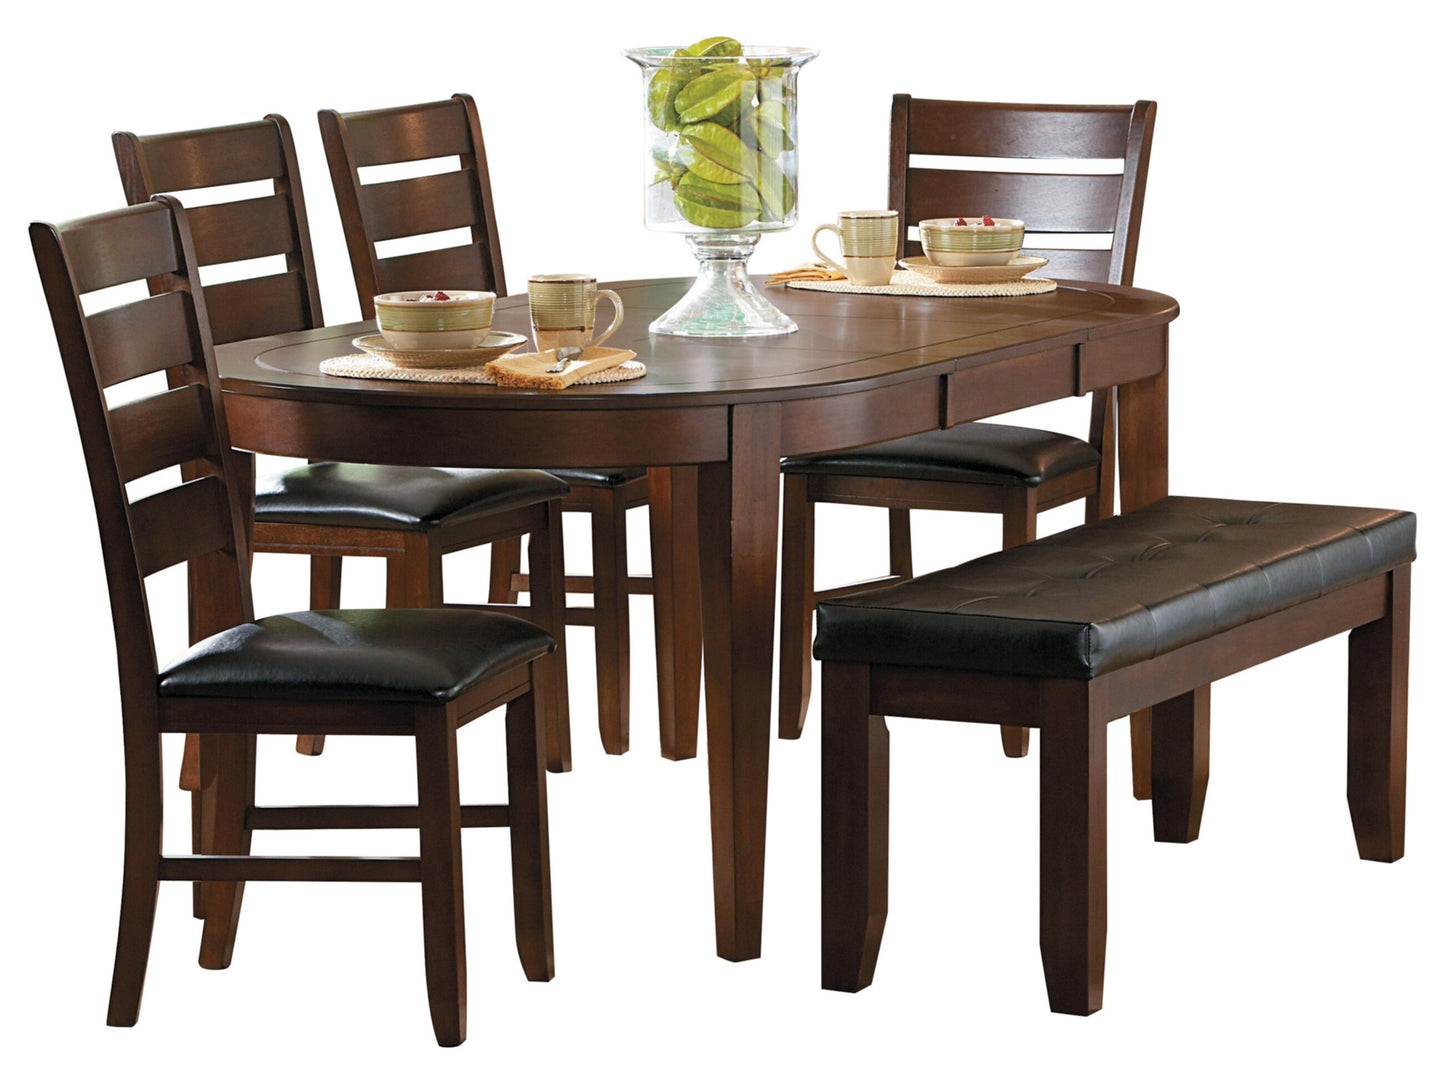 Homelegance Ameillia 6PC Dining Set 72 inch Oval Table, 4 Chair, Bench in Dark Brown